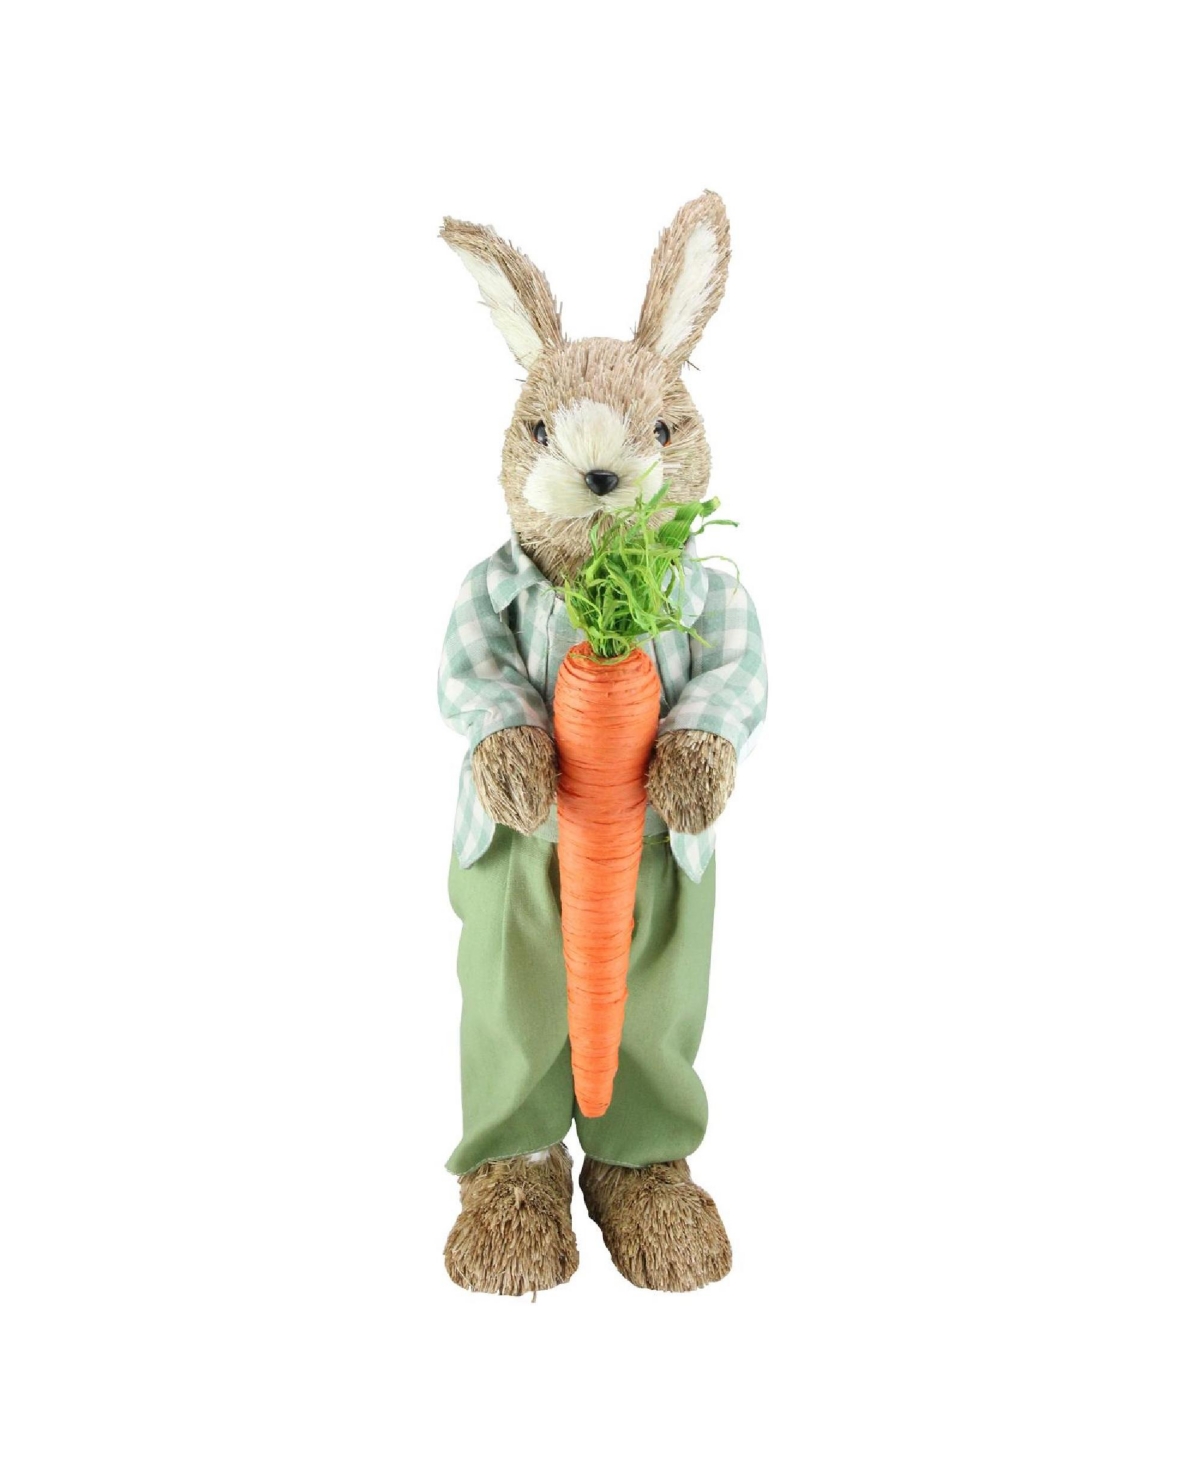 19" Spring Sisal Standing Bunny Rabbit Figure with Carrot - Brown